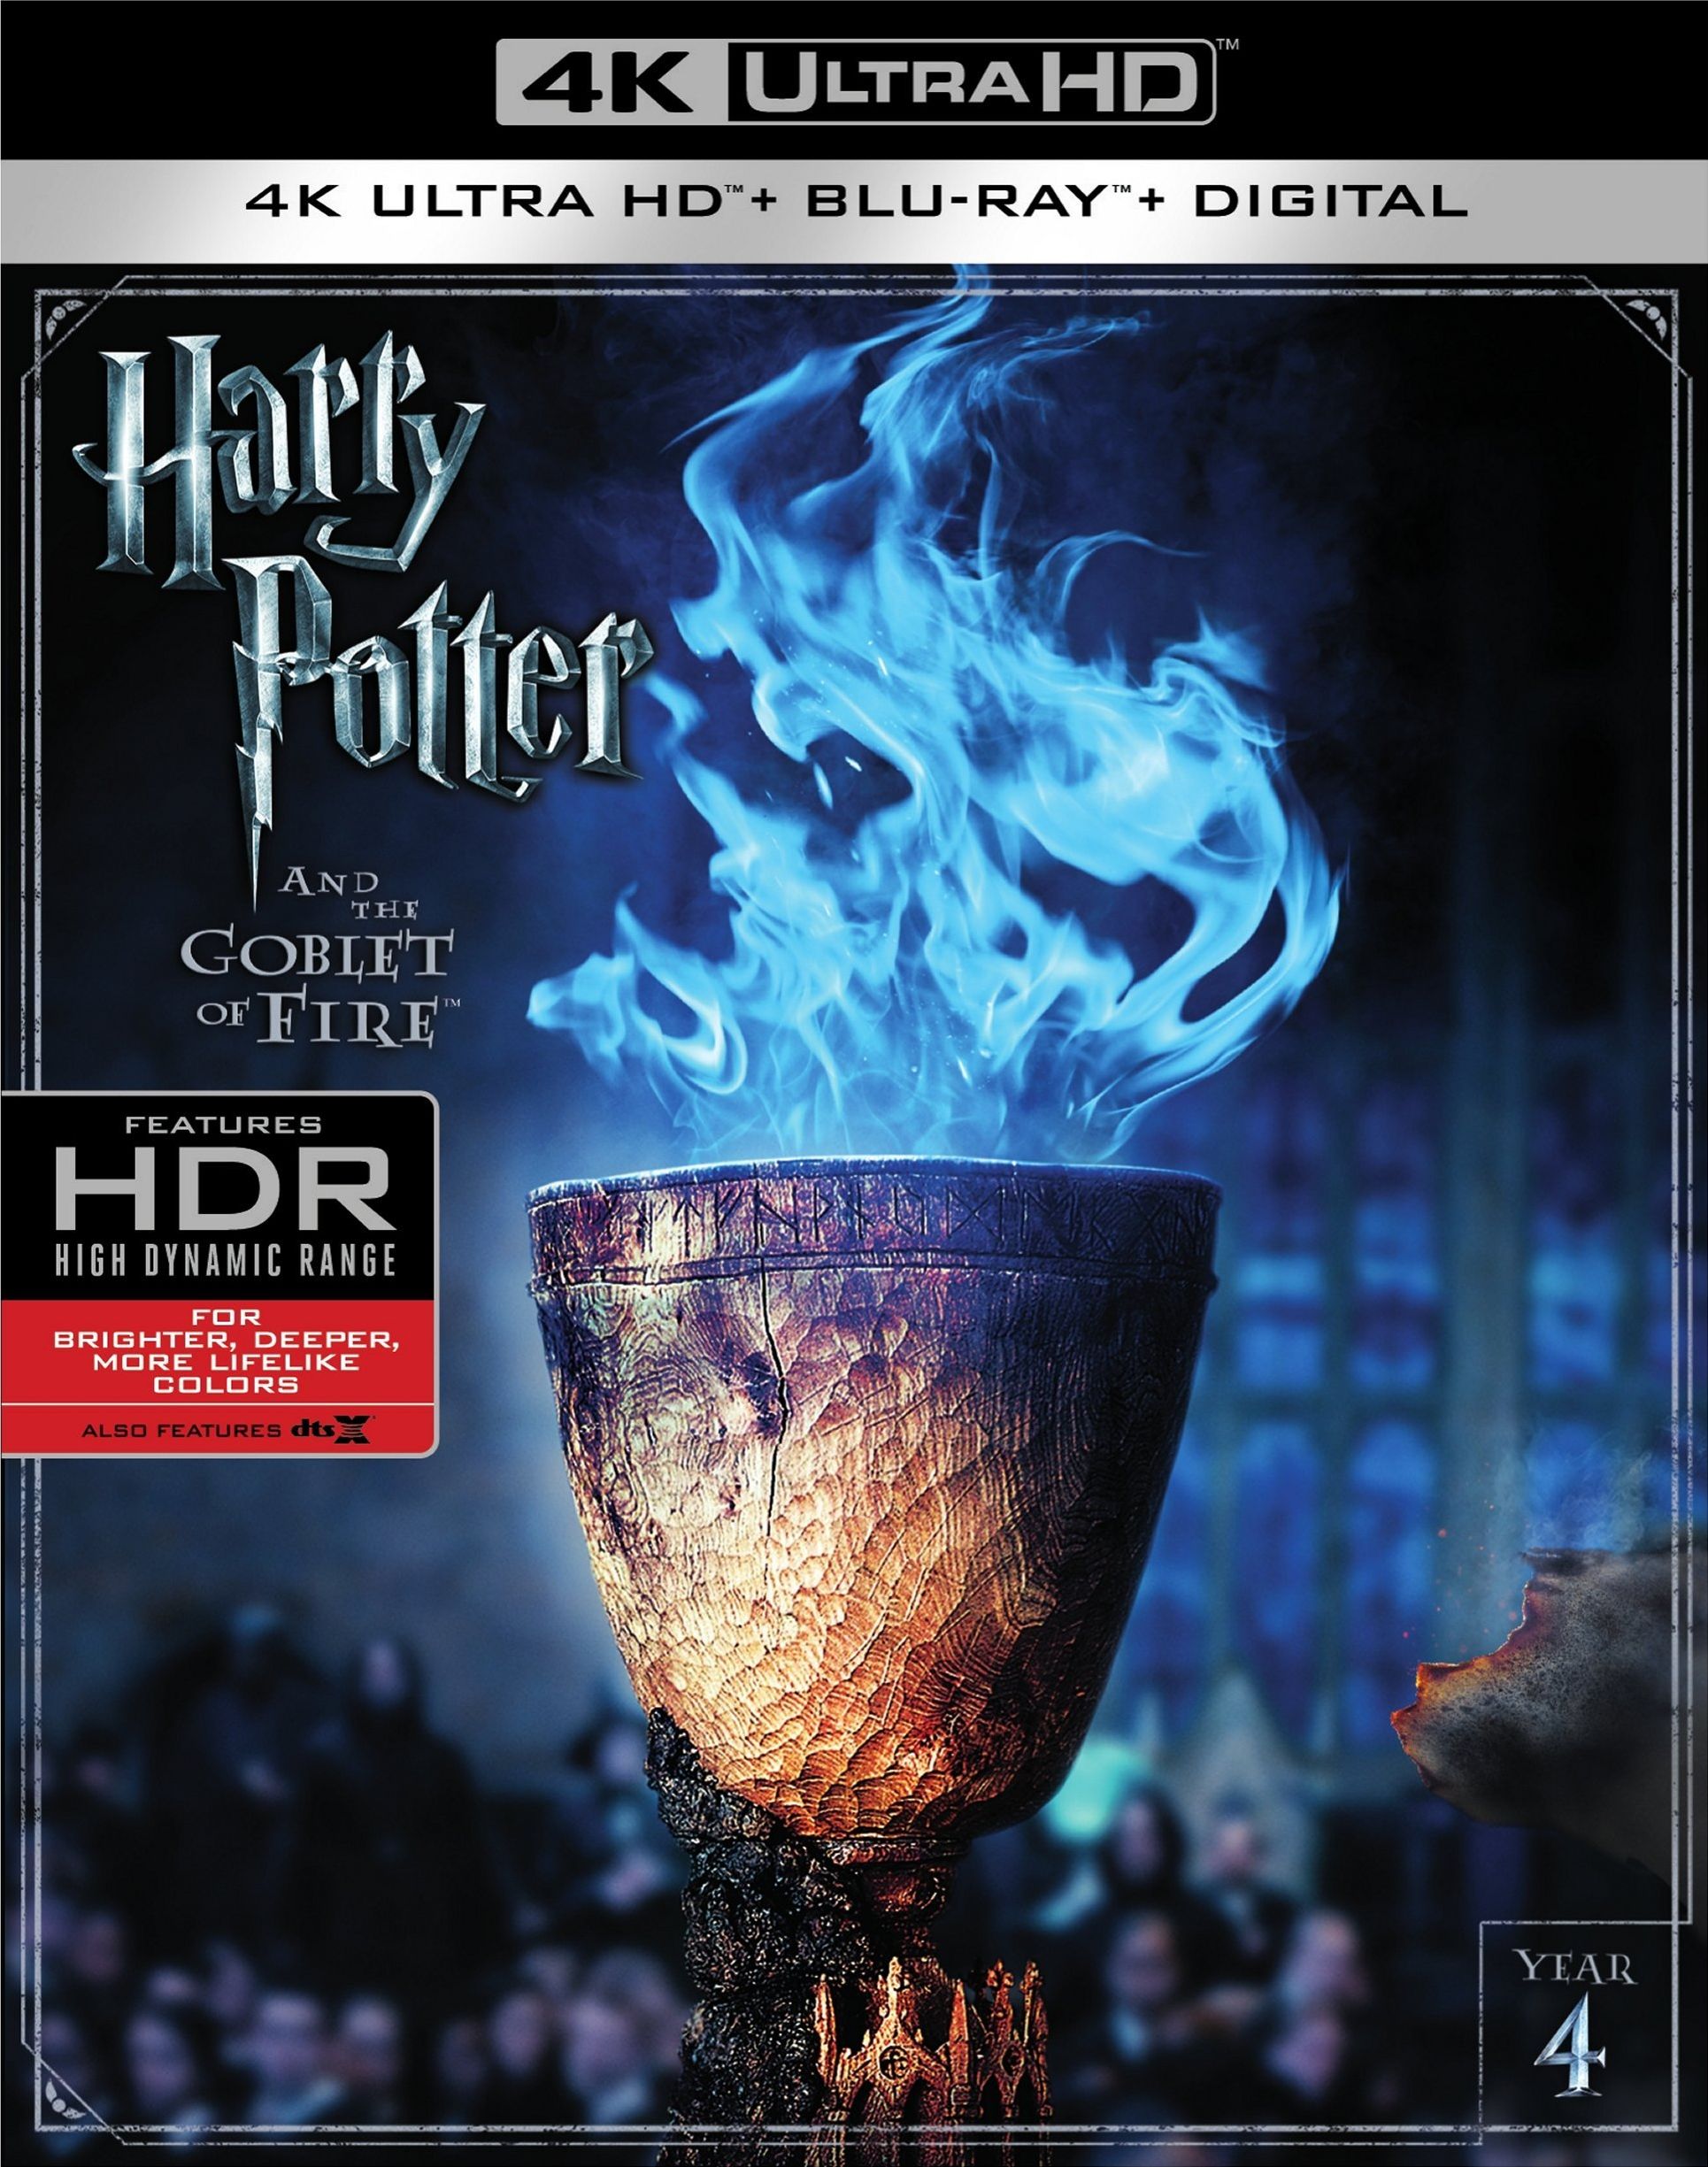 Harry Potter and the Goblet of Fire DVD Release Date March 7, 20061930 x 2449